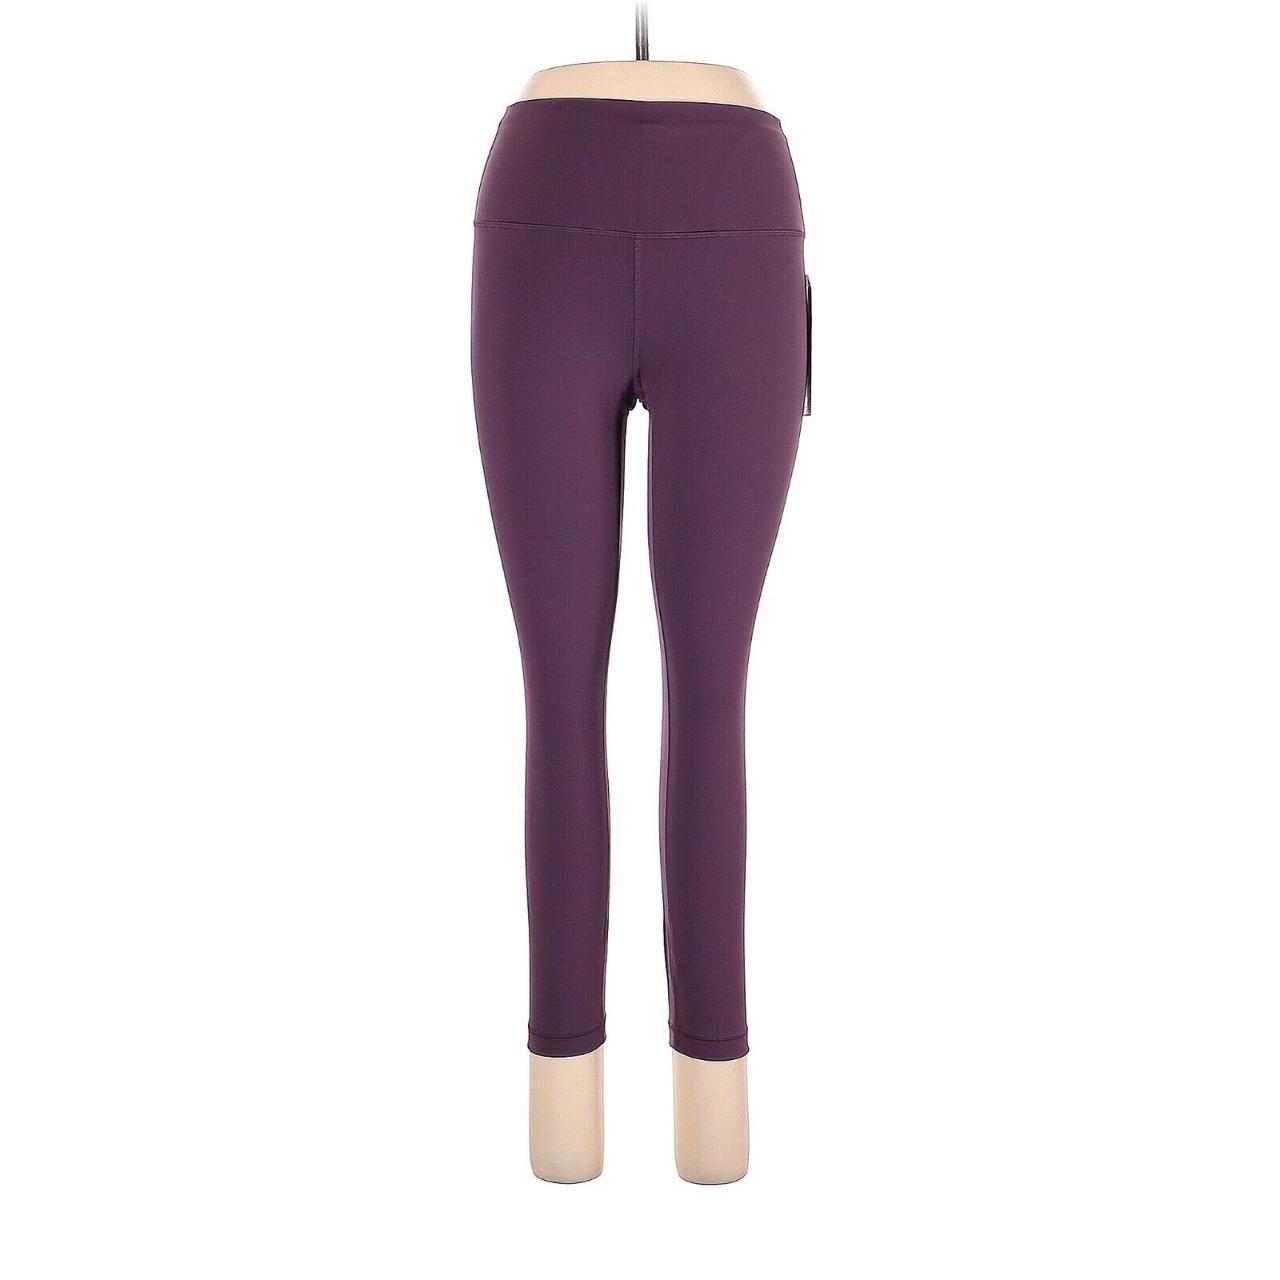 Lululemon Women's Purple Ribbed Size XS Leggings - Article Consignment